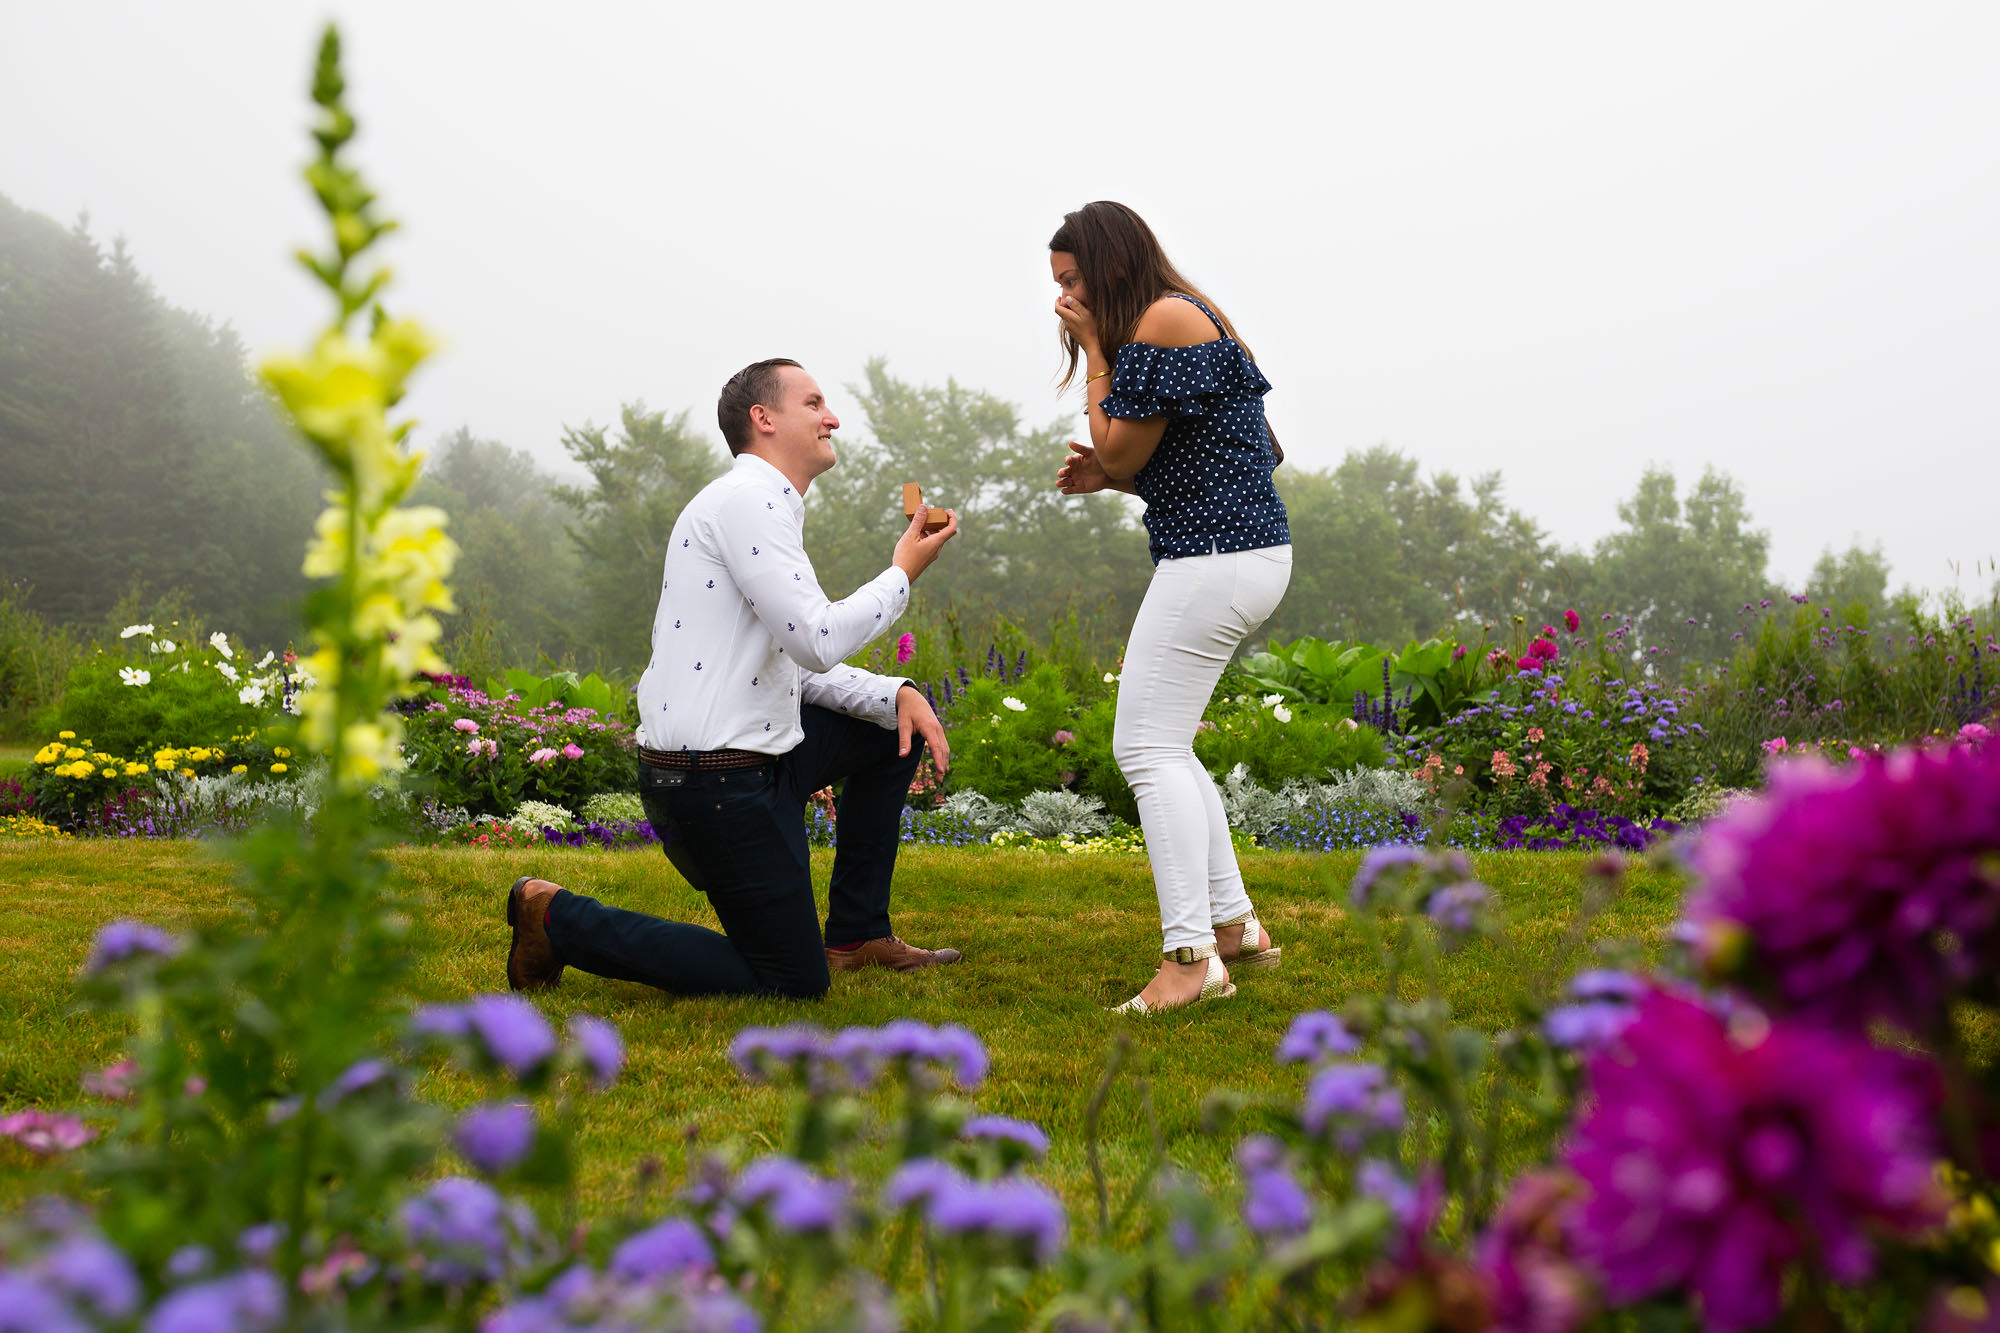 A man proposes to a woman in the garden at the Asticou Inn in Northeast Harbor, Maine